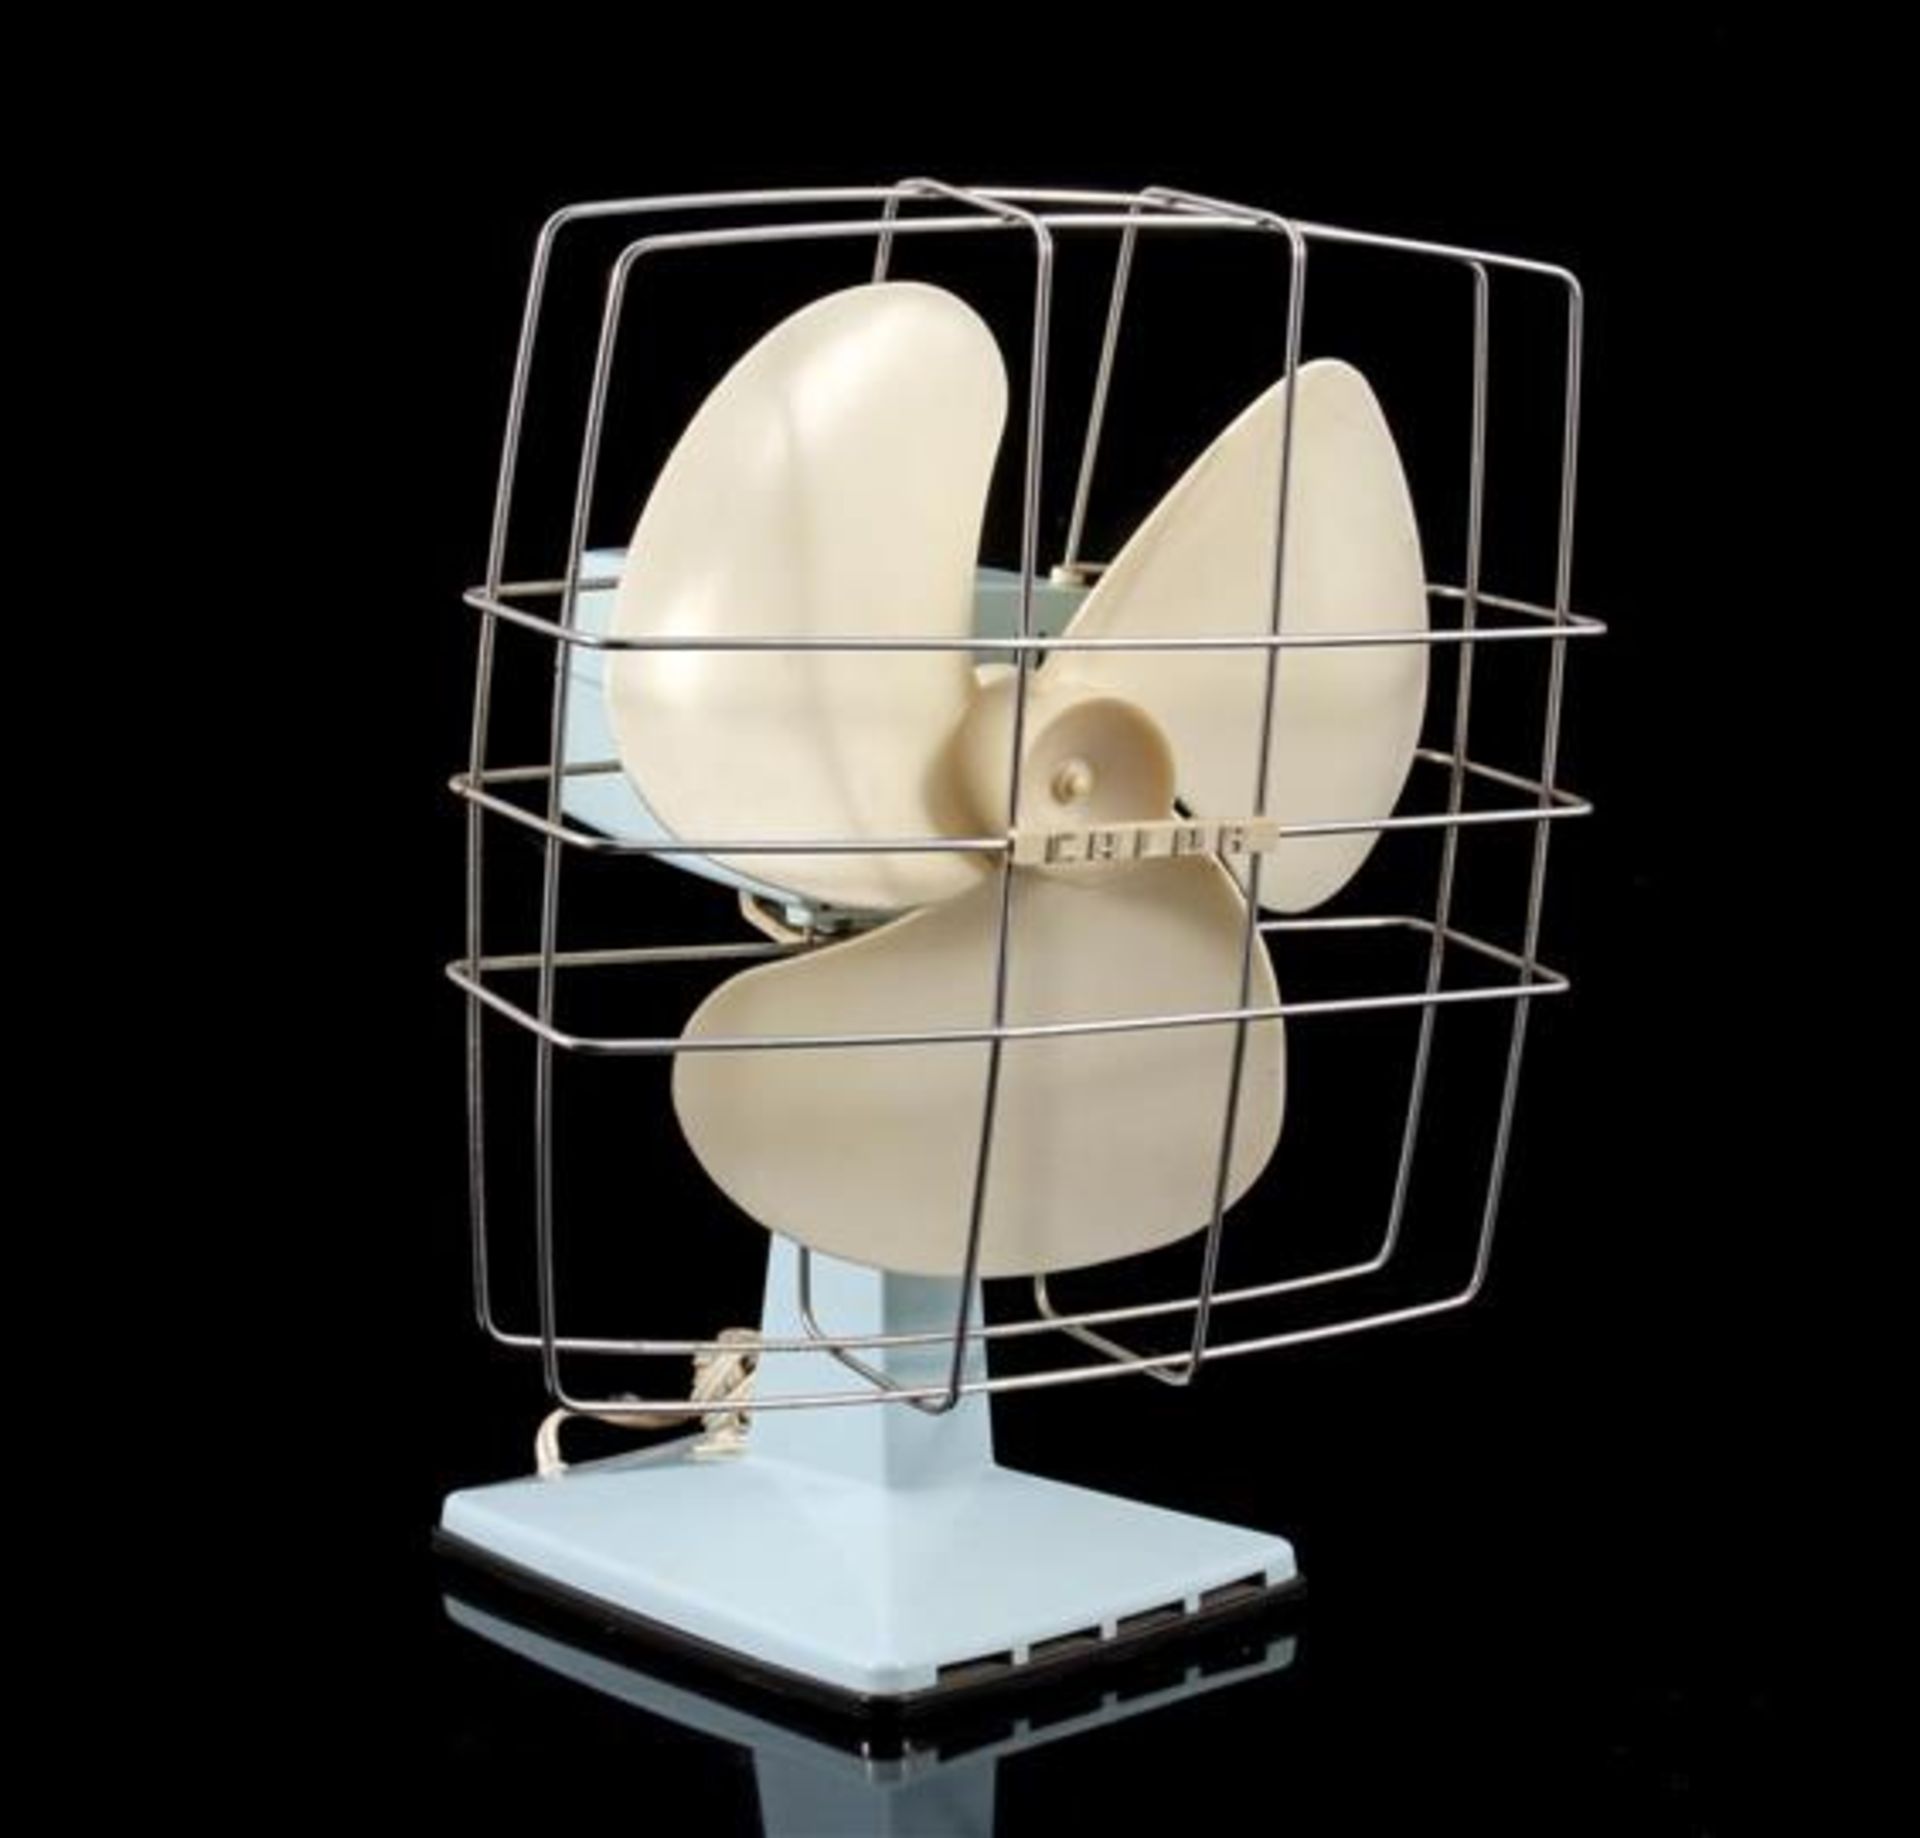 Calor table fan, 35 cm high in working condition